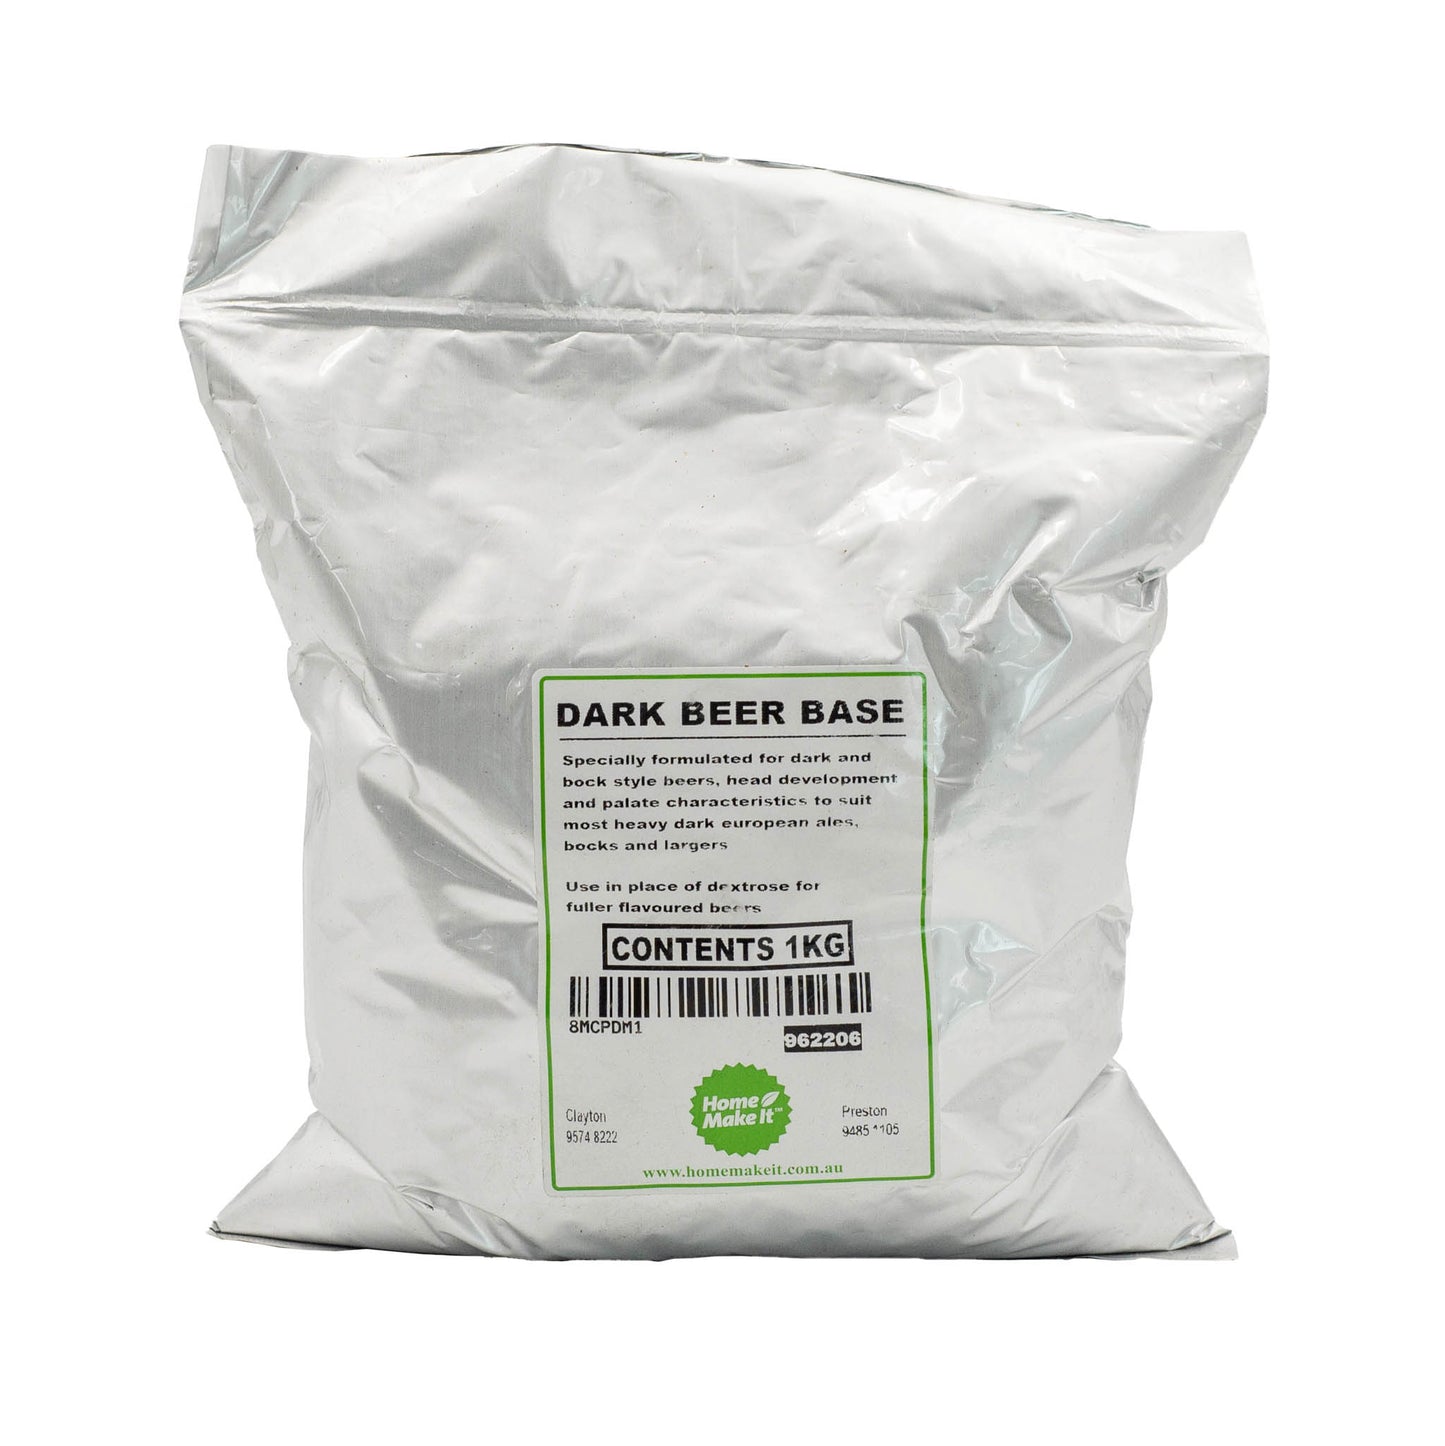 1kg bag of dark dried malt extract for beer